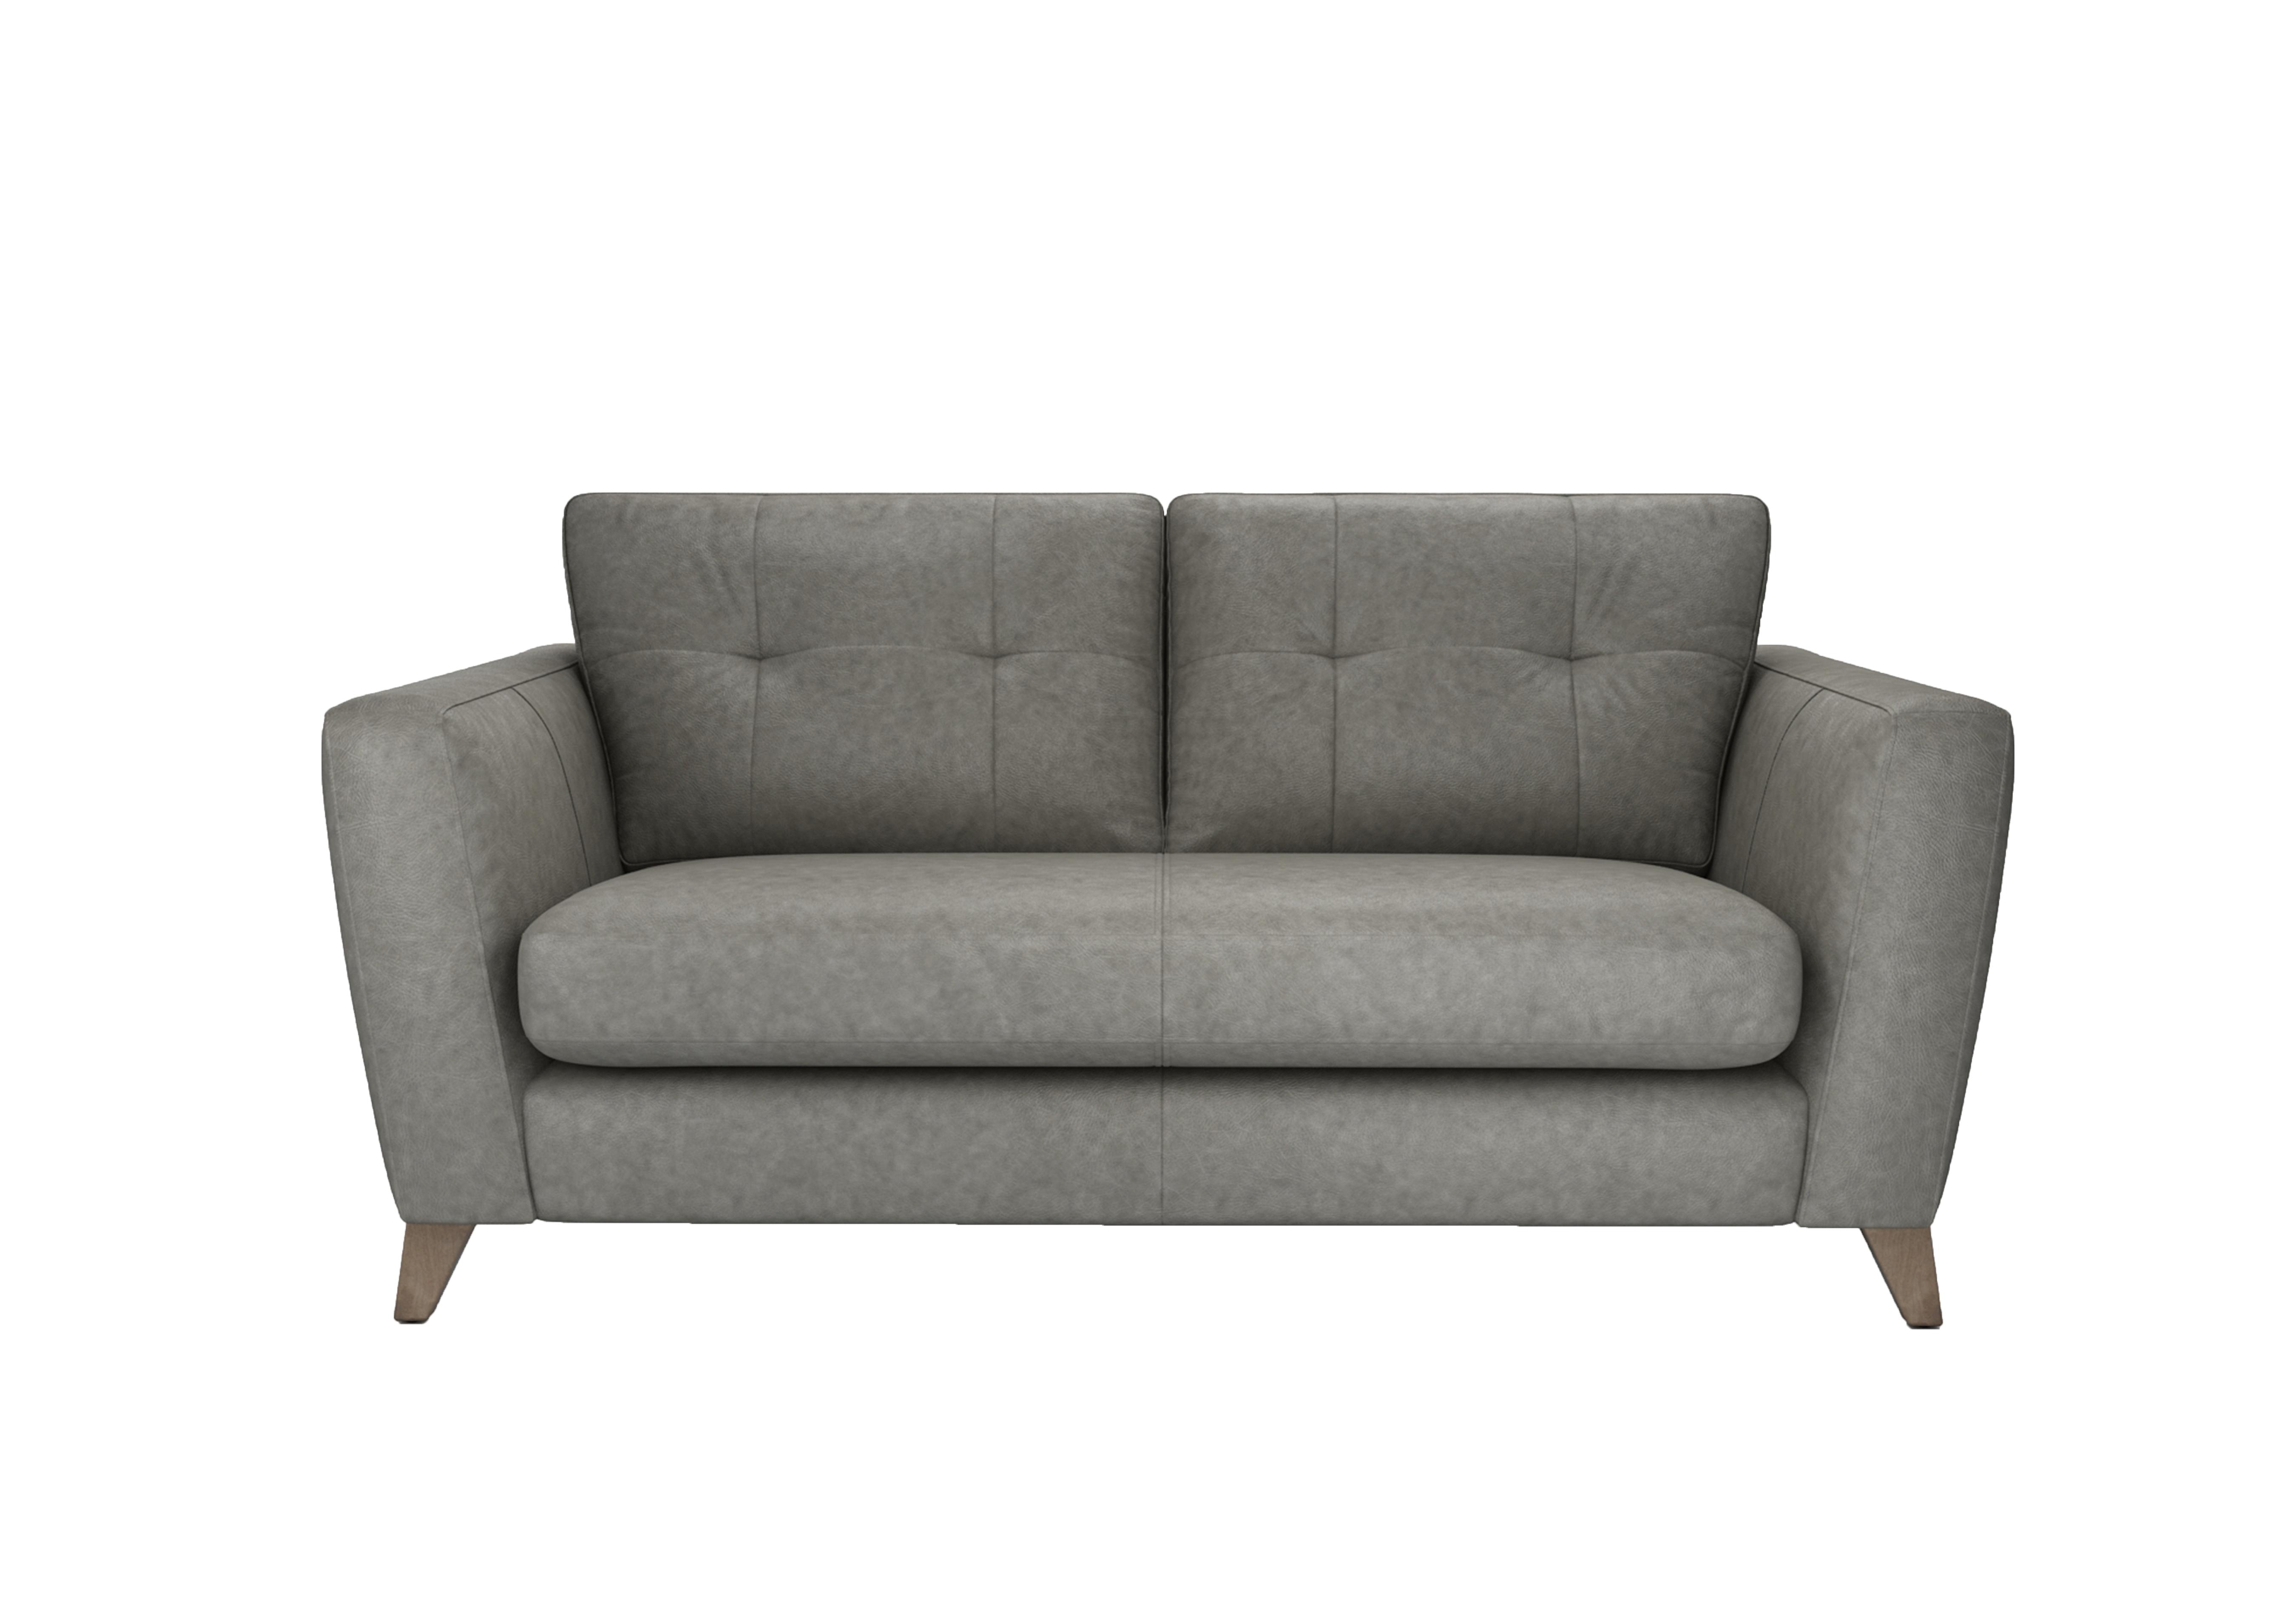 Hermione 2.5 Seater Leather Sofa in Amo191 Amonite Wo Ft on Furniture Village